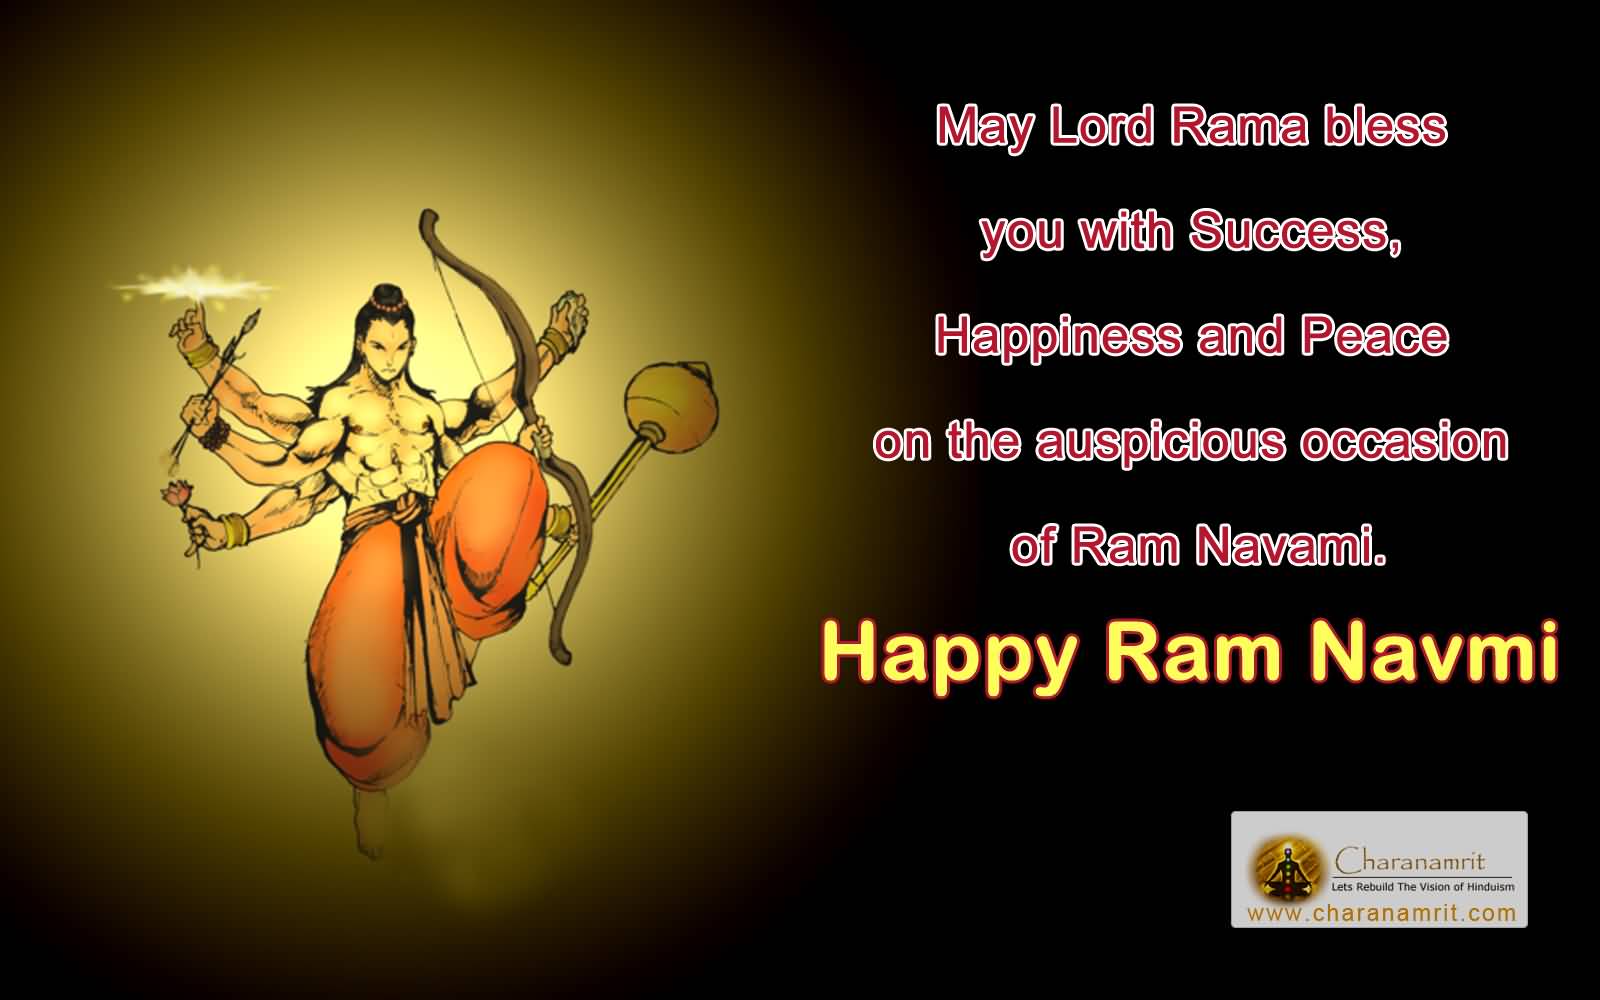 May Lord Rama Bless You With Success, Happiness And Peace On The Auspicious Occasion Of Ram Navami